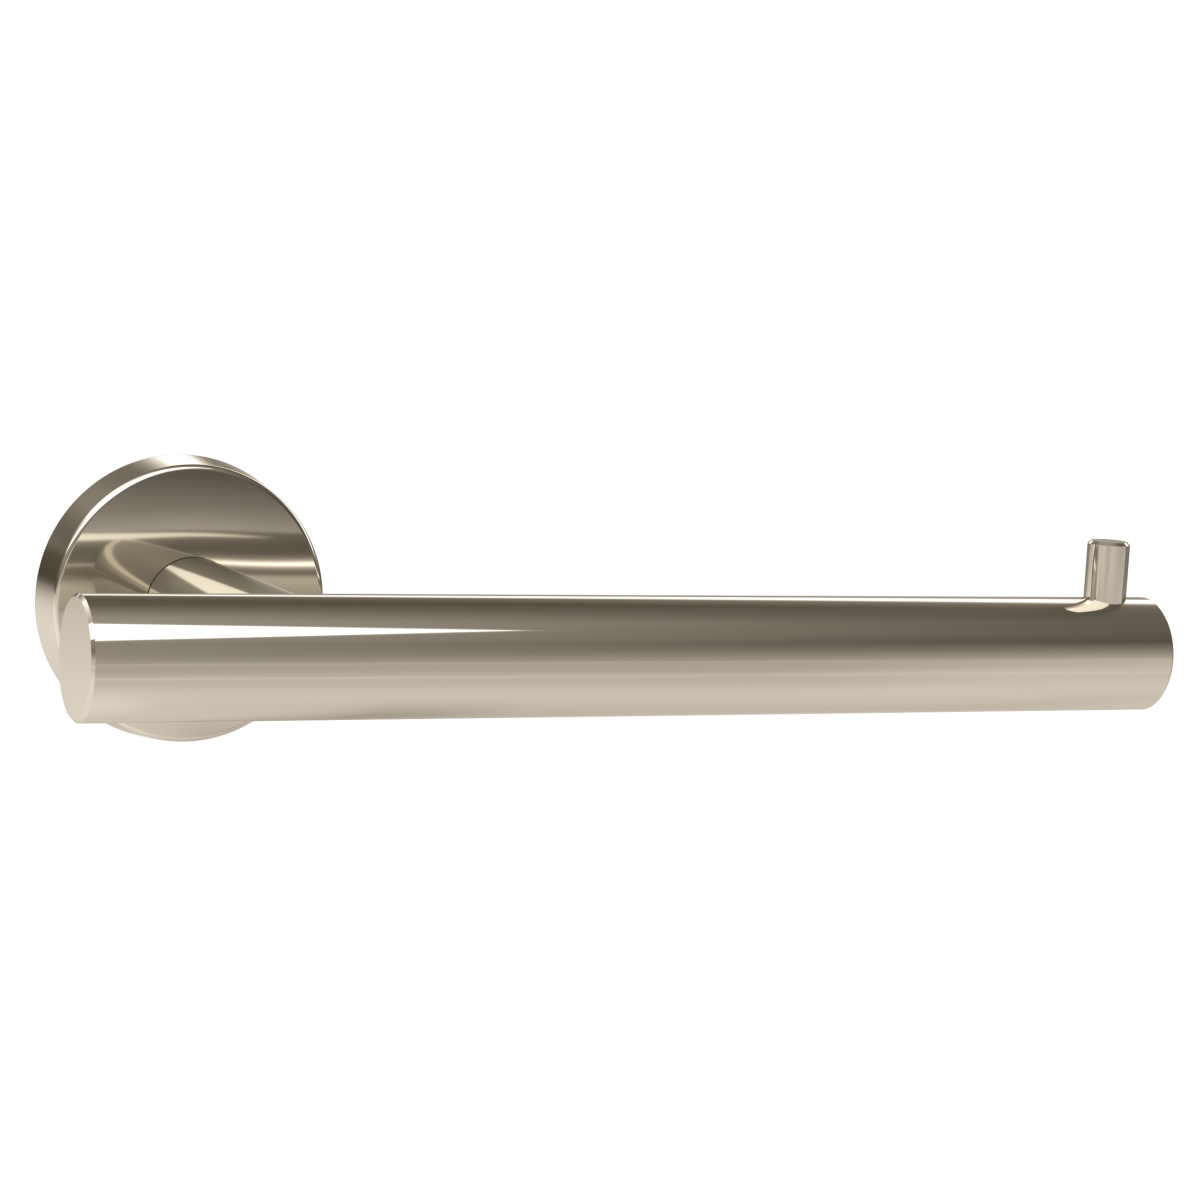 Picture of Amerock BH26540PSS Arrondi Single Post Tissue Roll Holder in Polished Stainless Steel